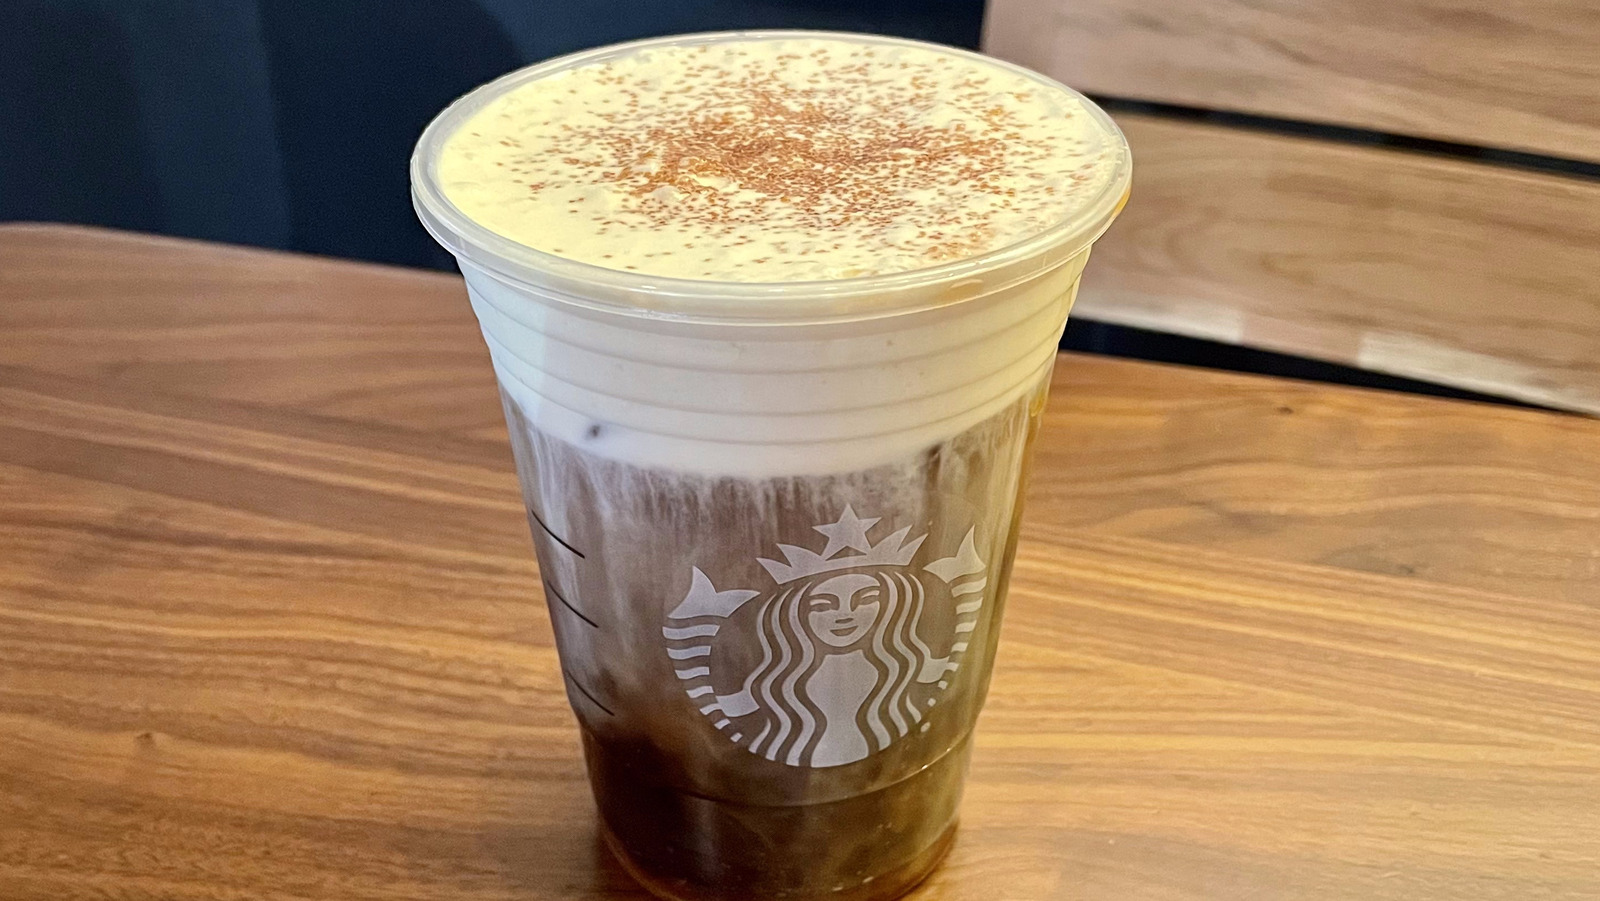 We Tried Starbucks’ New Pistachio Cream Cold Brew. It Will Chase Your Winter Blues Away – Mashed